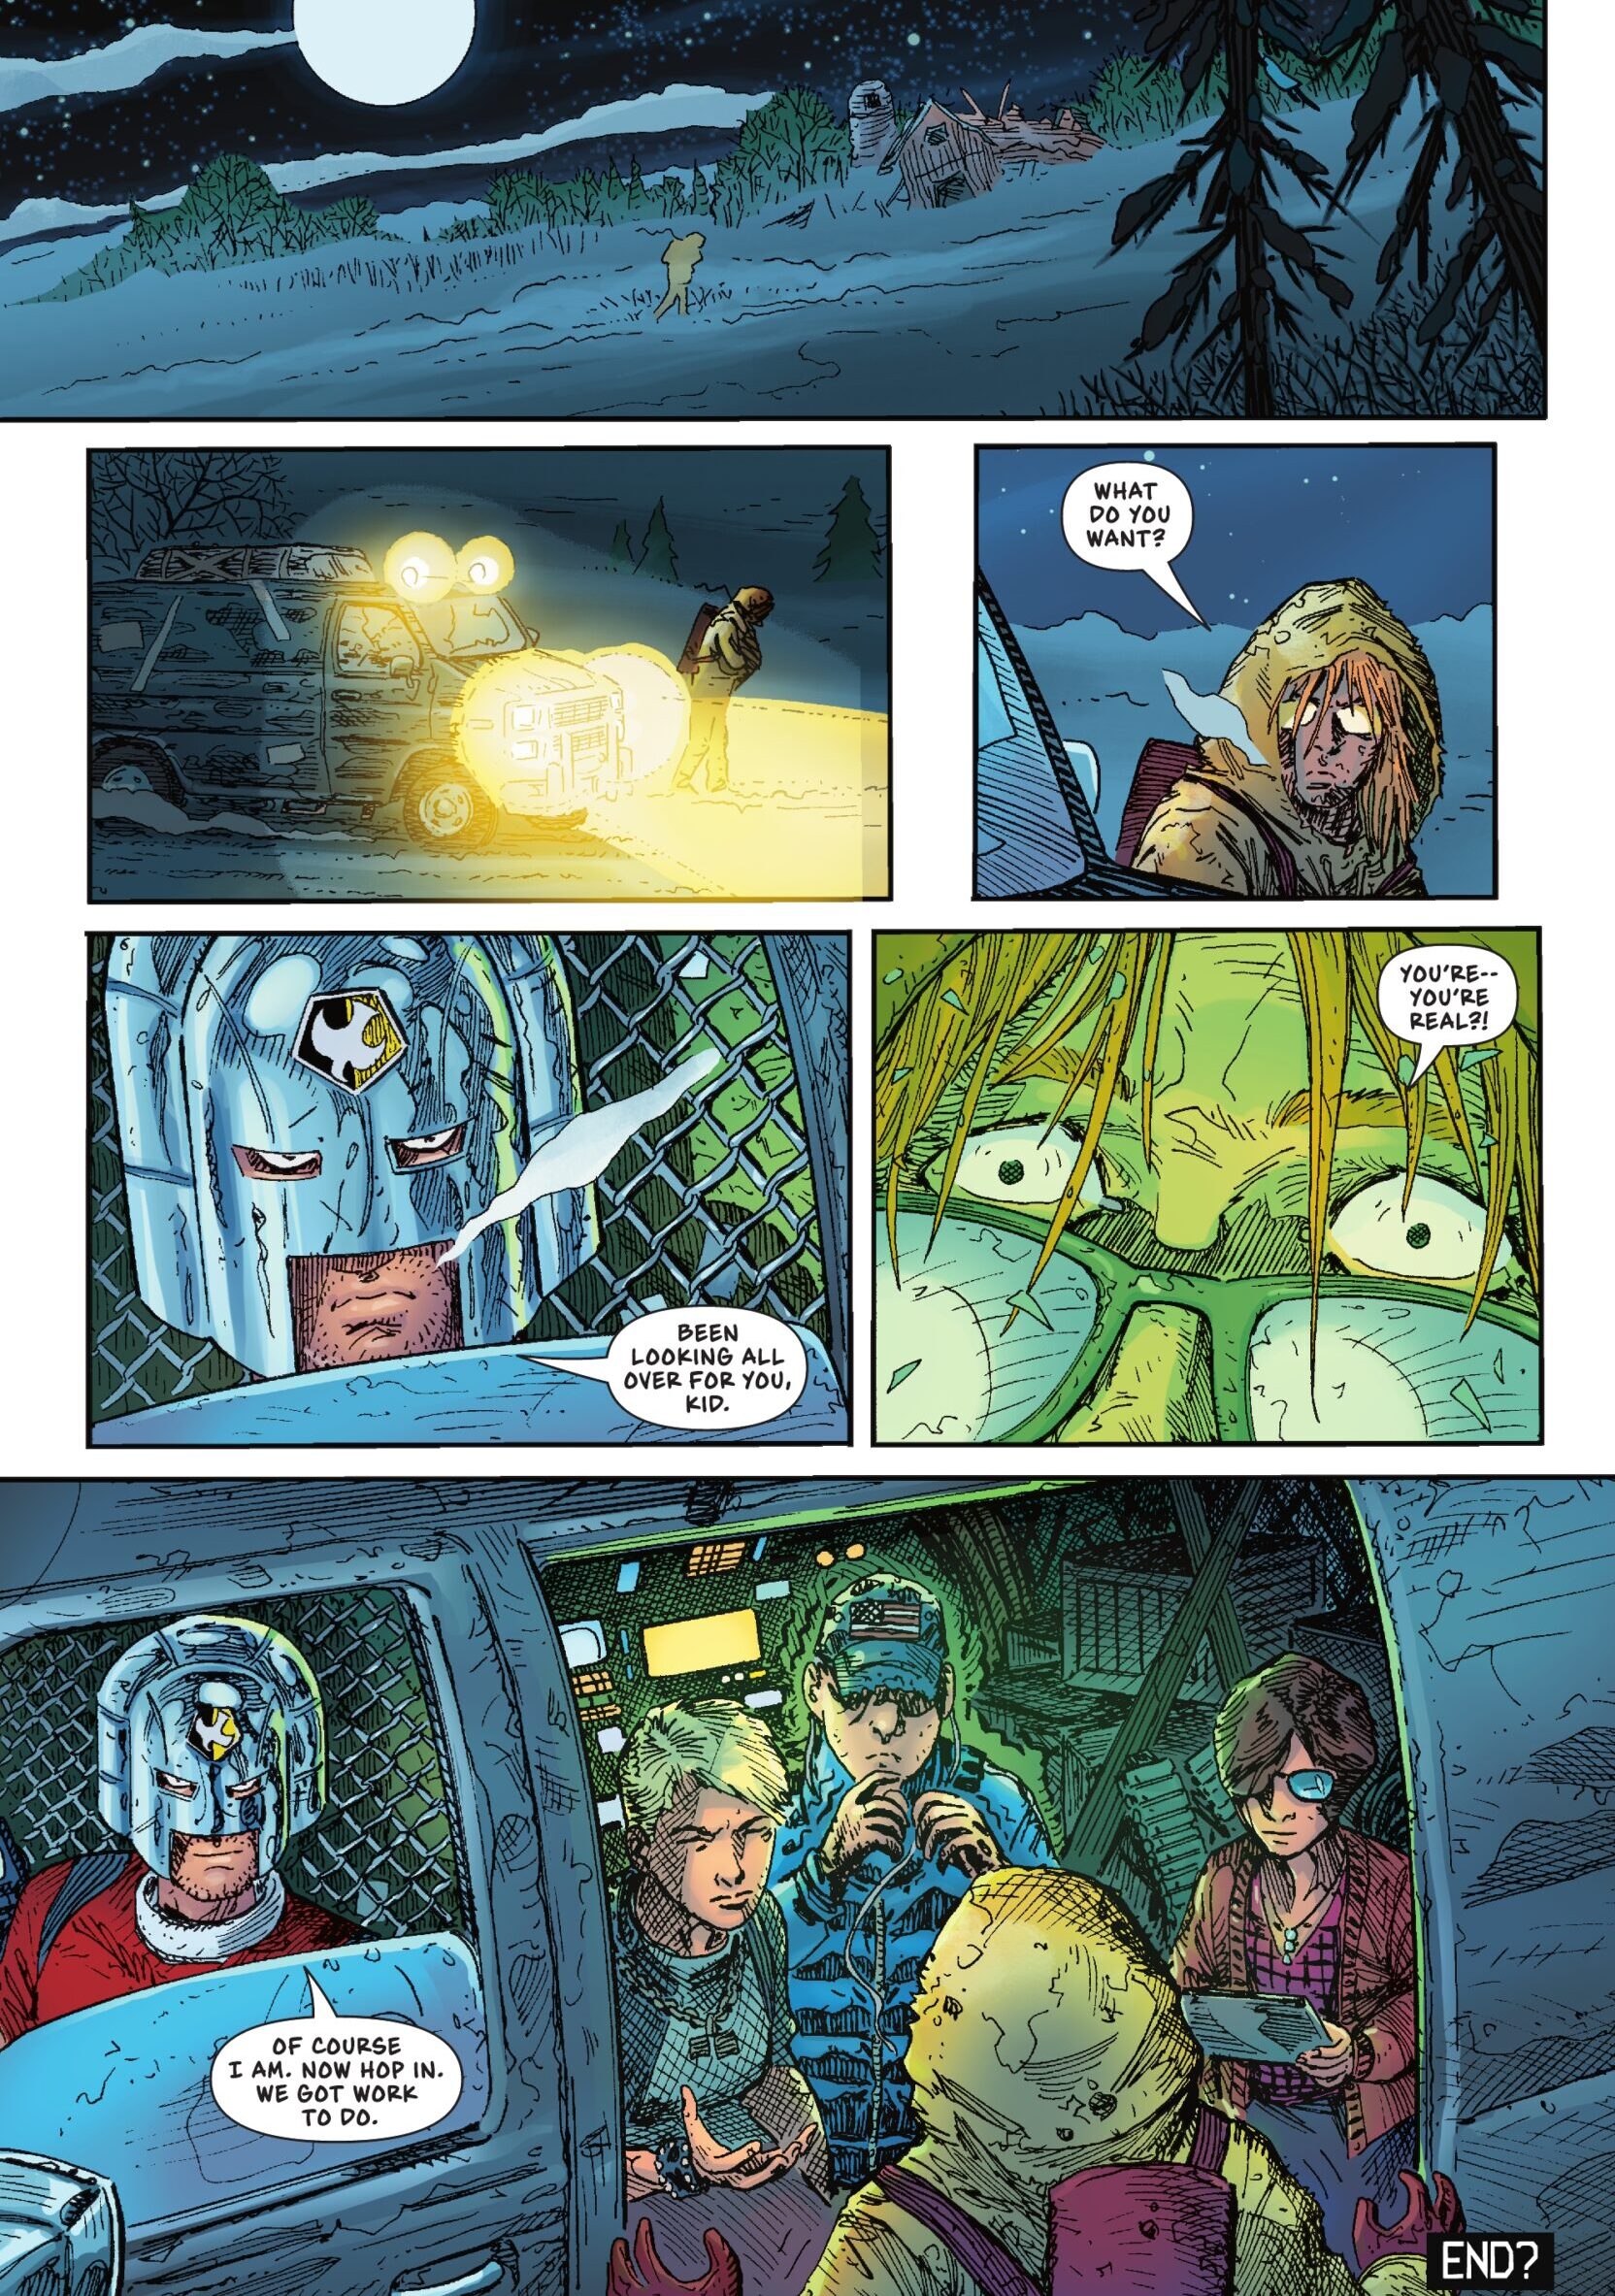 Peacemaker signs off Keith Giffen's final published comic book page in Inferior Five Vol. 2 #6 "Inferior Five" (2021), DC. Words by Keith Giffen and Jeff Lemire, art by Scott Kolins, Hi-Fi Design, and Rob Leigh.